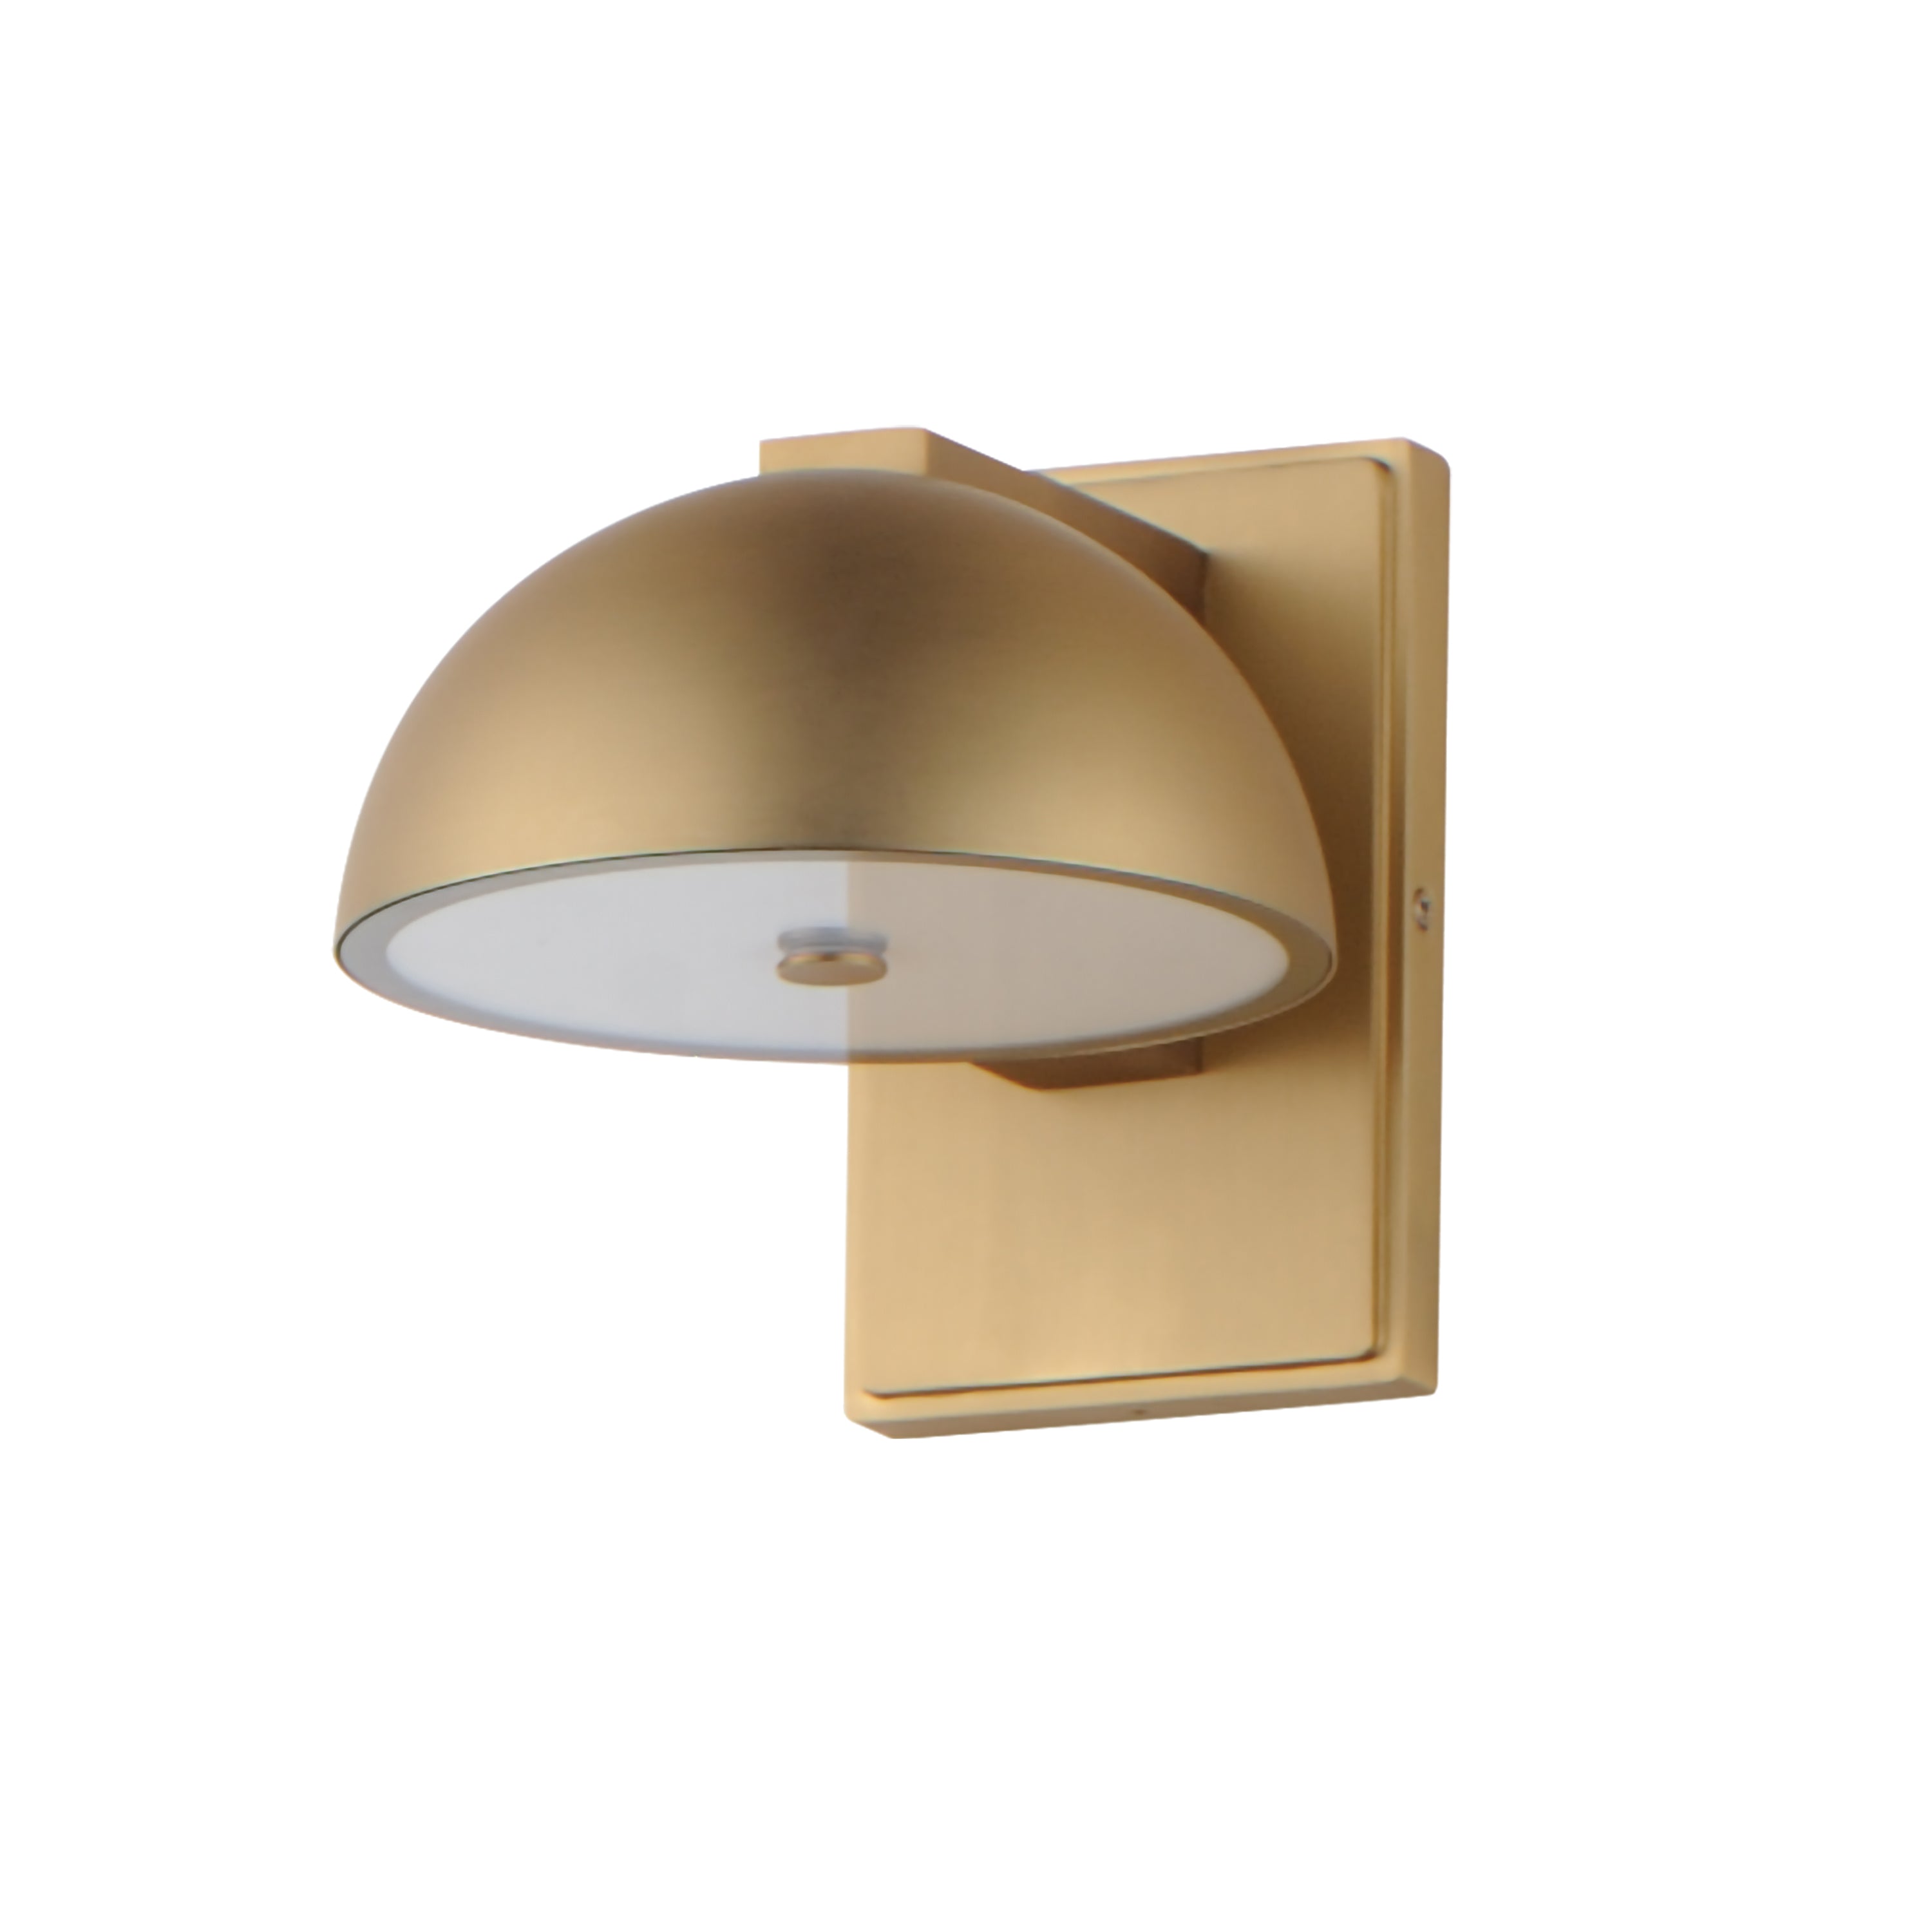 Cauldron-Outdoor Wall Mount Outdoor l Wall ET2 x7x7 Gold 